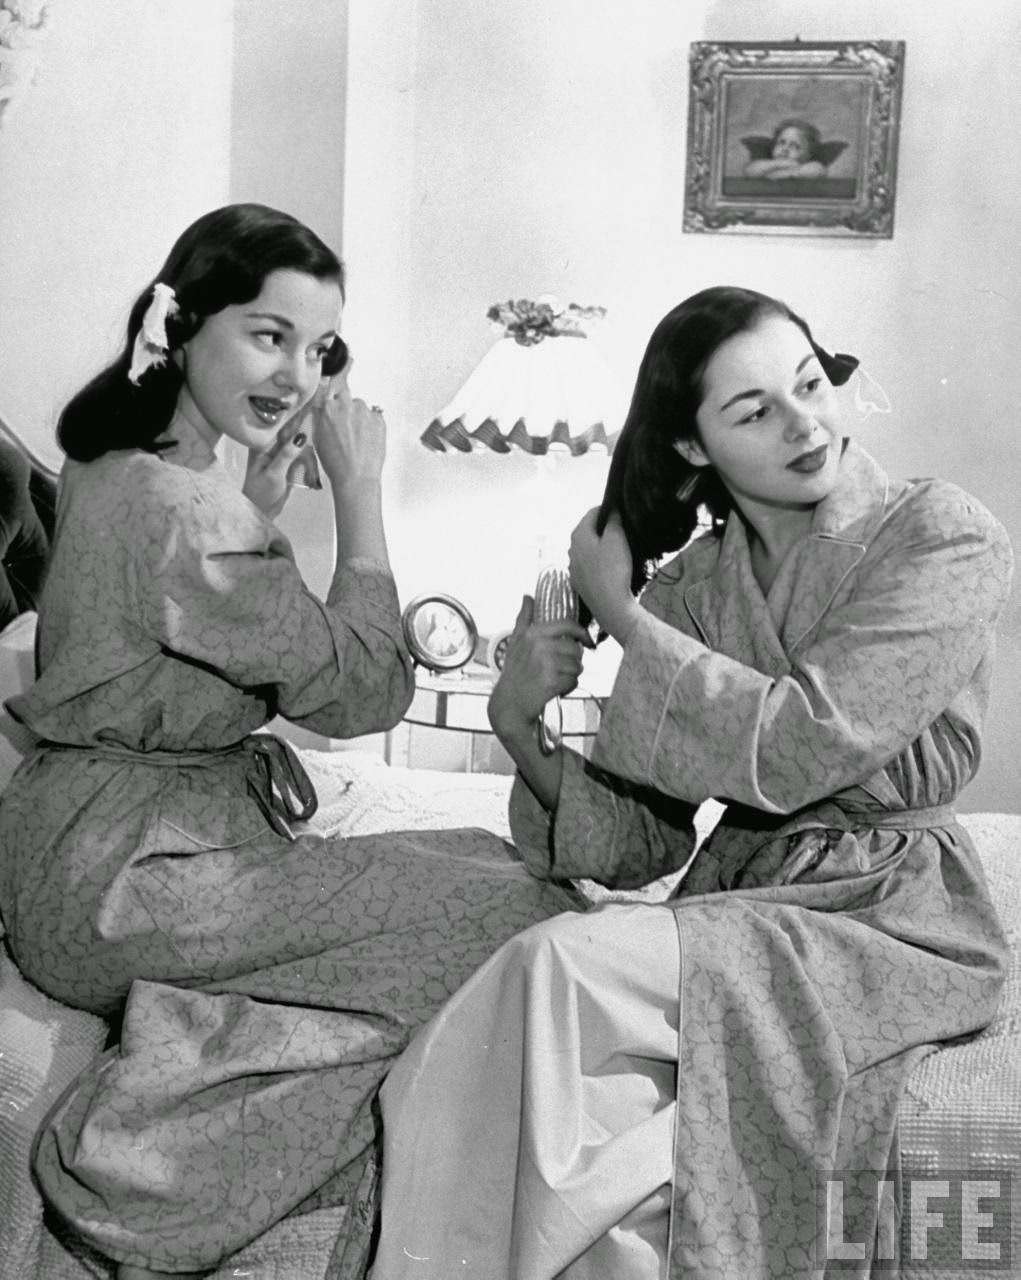 The O'Connor twins Gloria and Consuelo, setting their hair, 1947